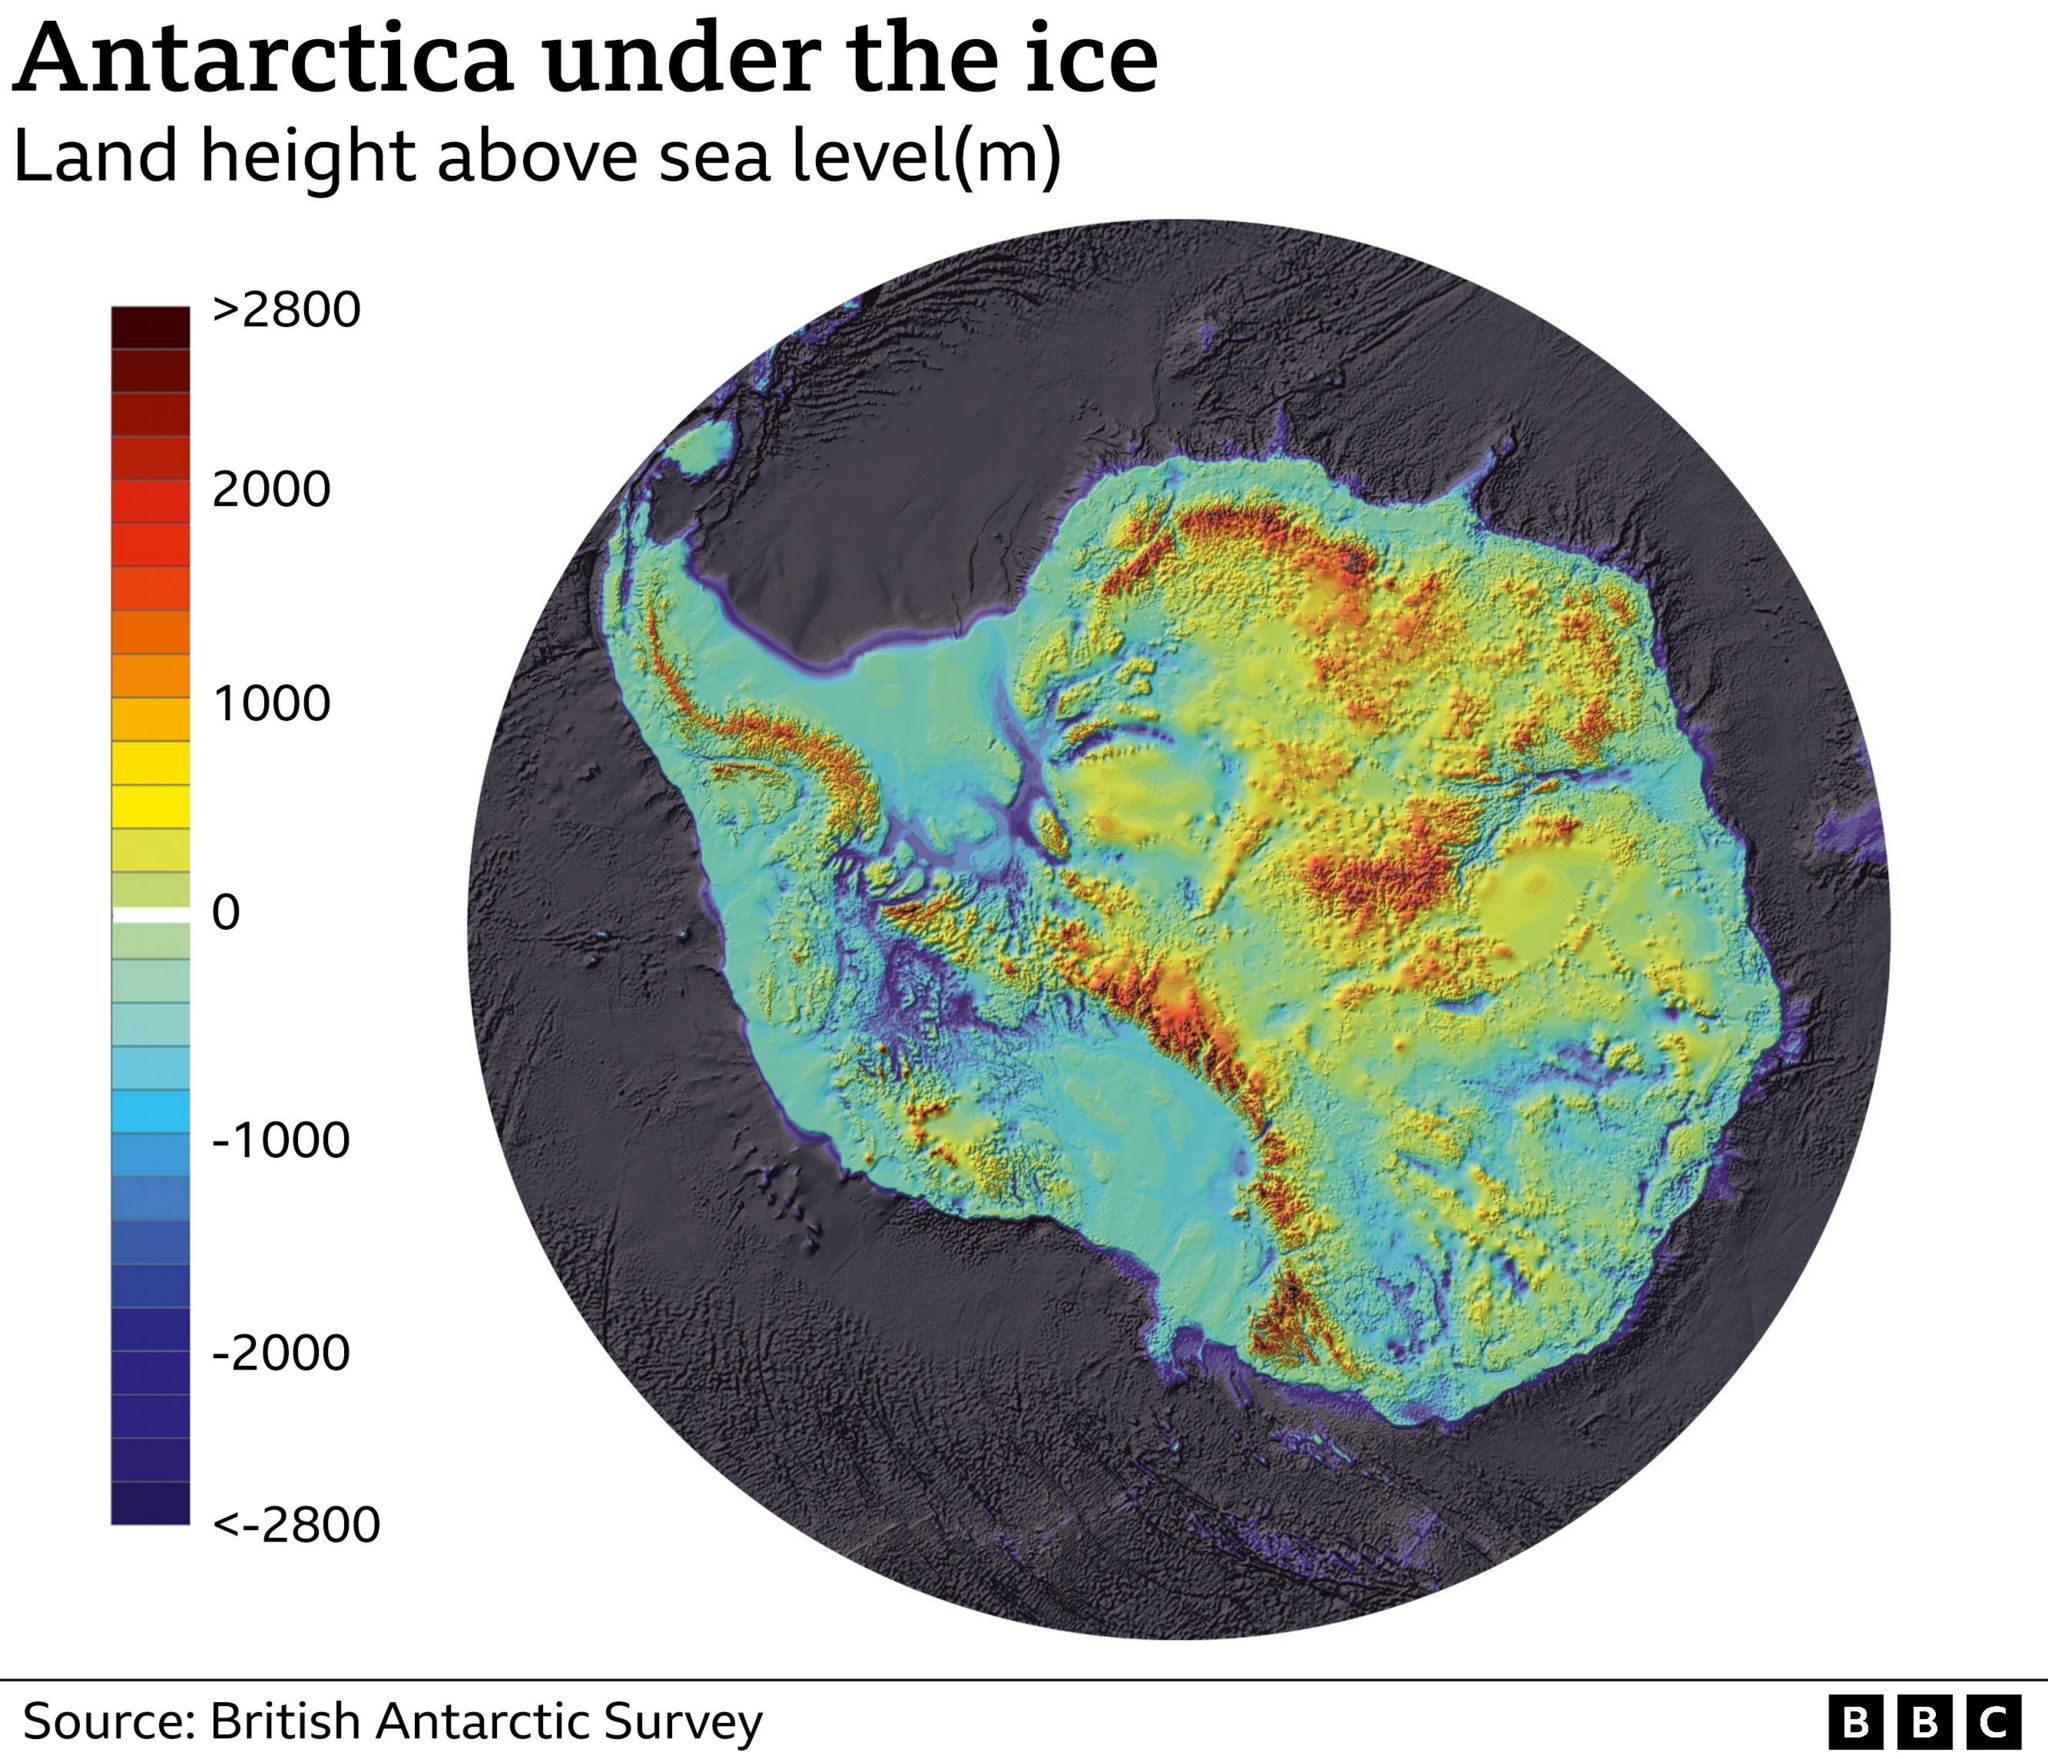 A topographical map of Antarctica